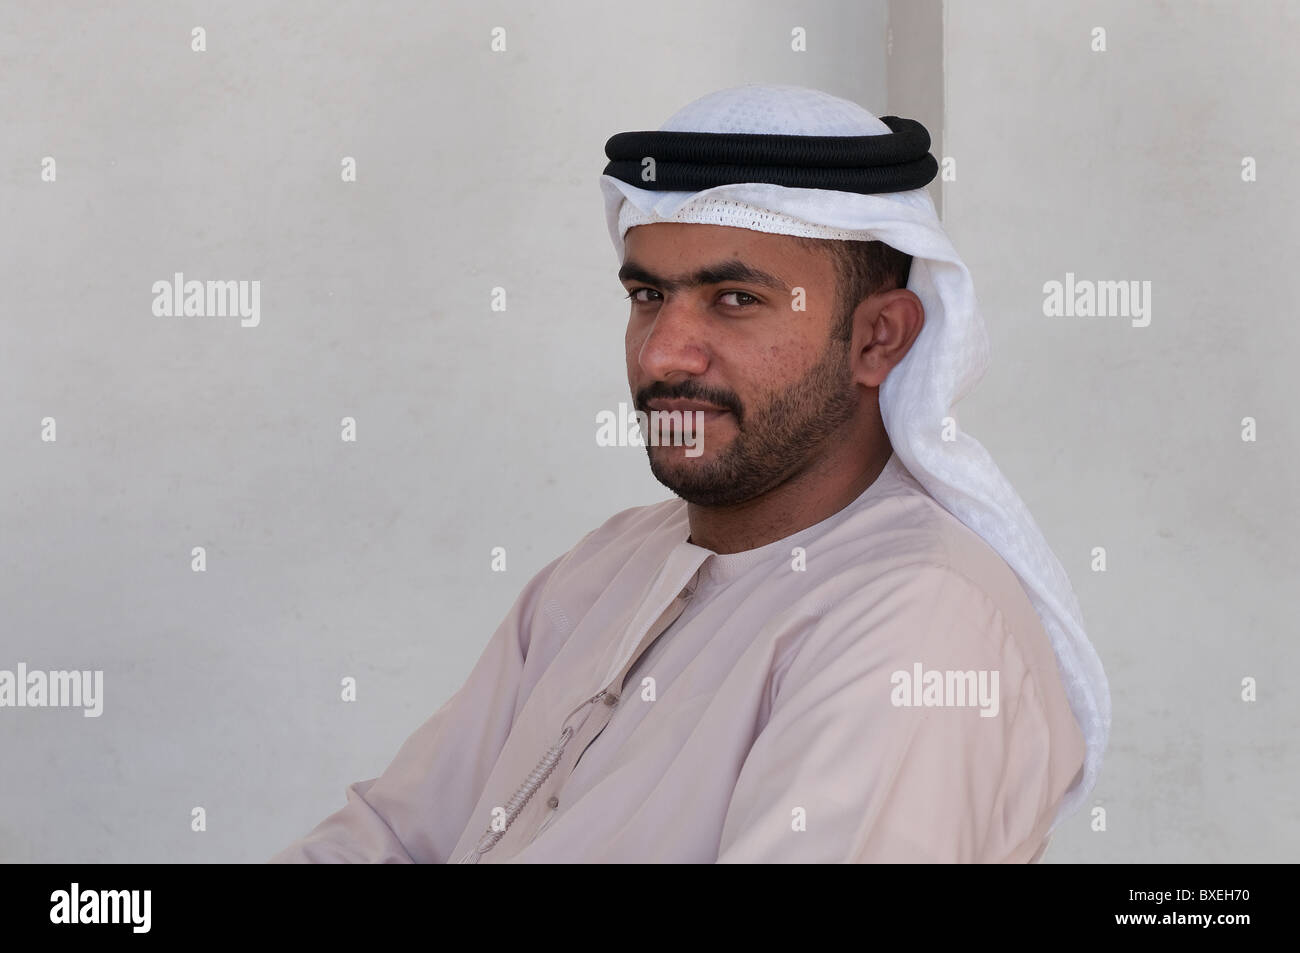 A Man with the typical Arabic dress in Dubai Stock Photo